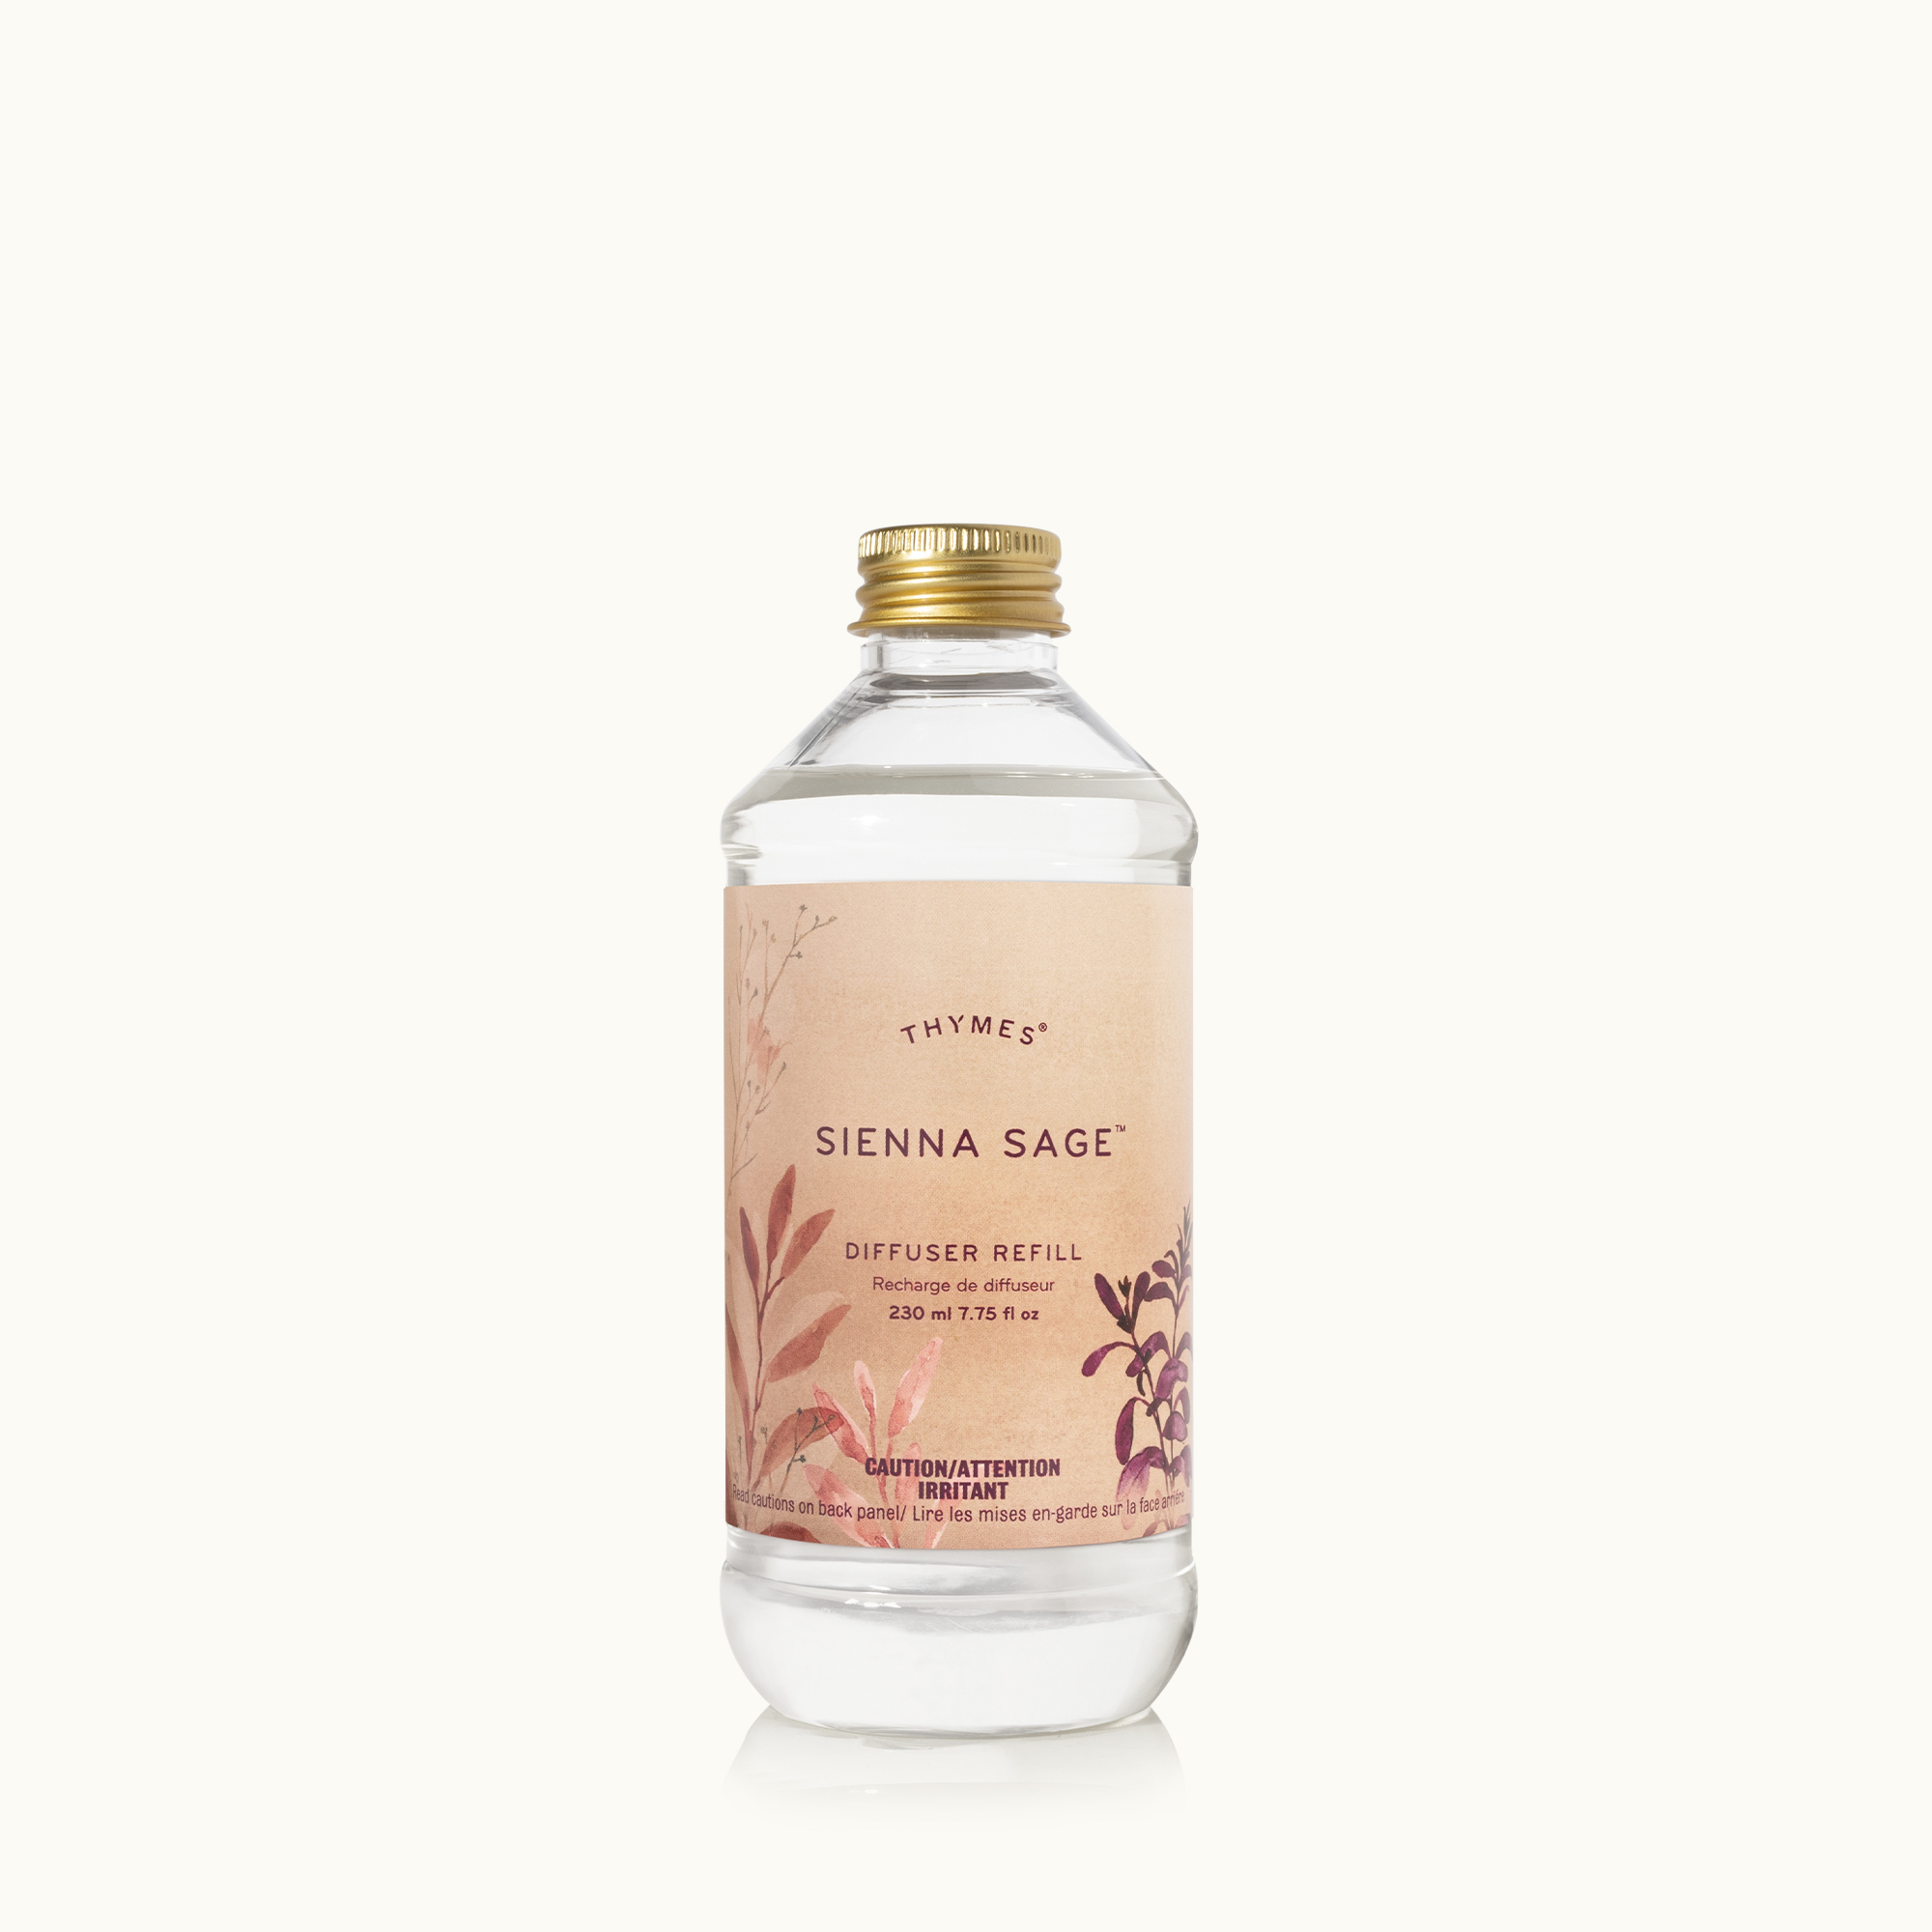 Thymes - Sienna Sage Diffuser Oil Refill